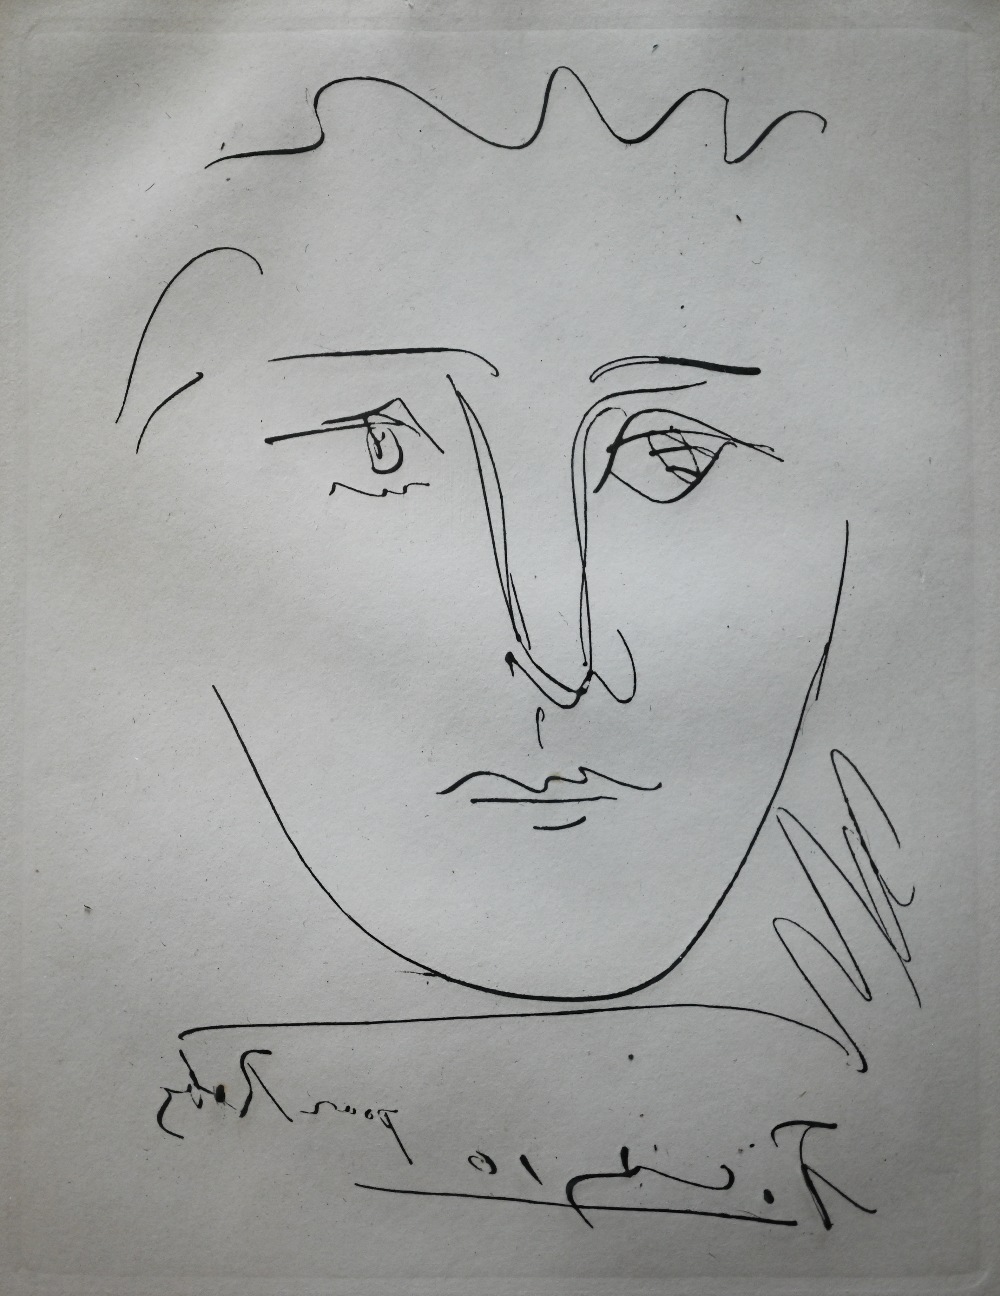 Pablo Picasso (1881-1973), 'Pour Robie', etching, signed in the plate, 24 x 19 cm - Image 2 of 4